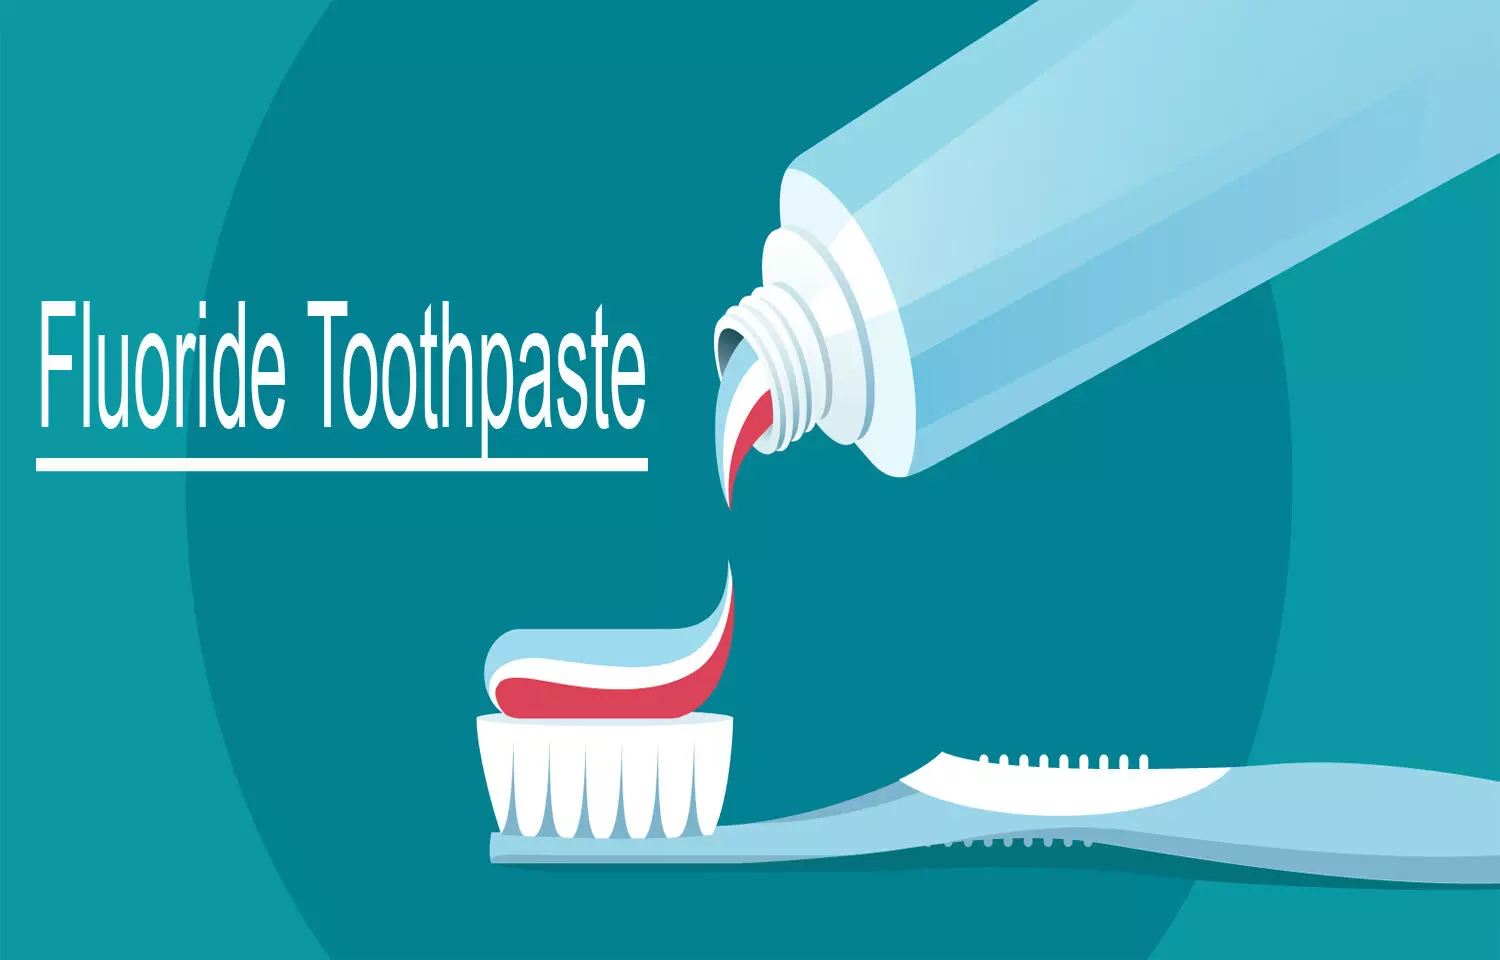 Stannous fluoride toothpaste helps protect against enamel erosions: Study